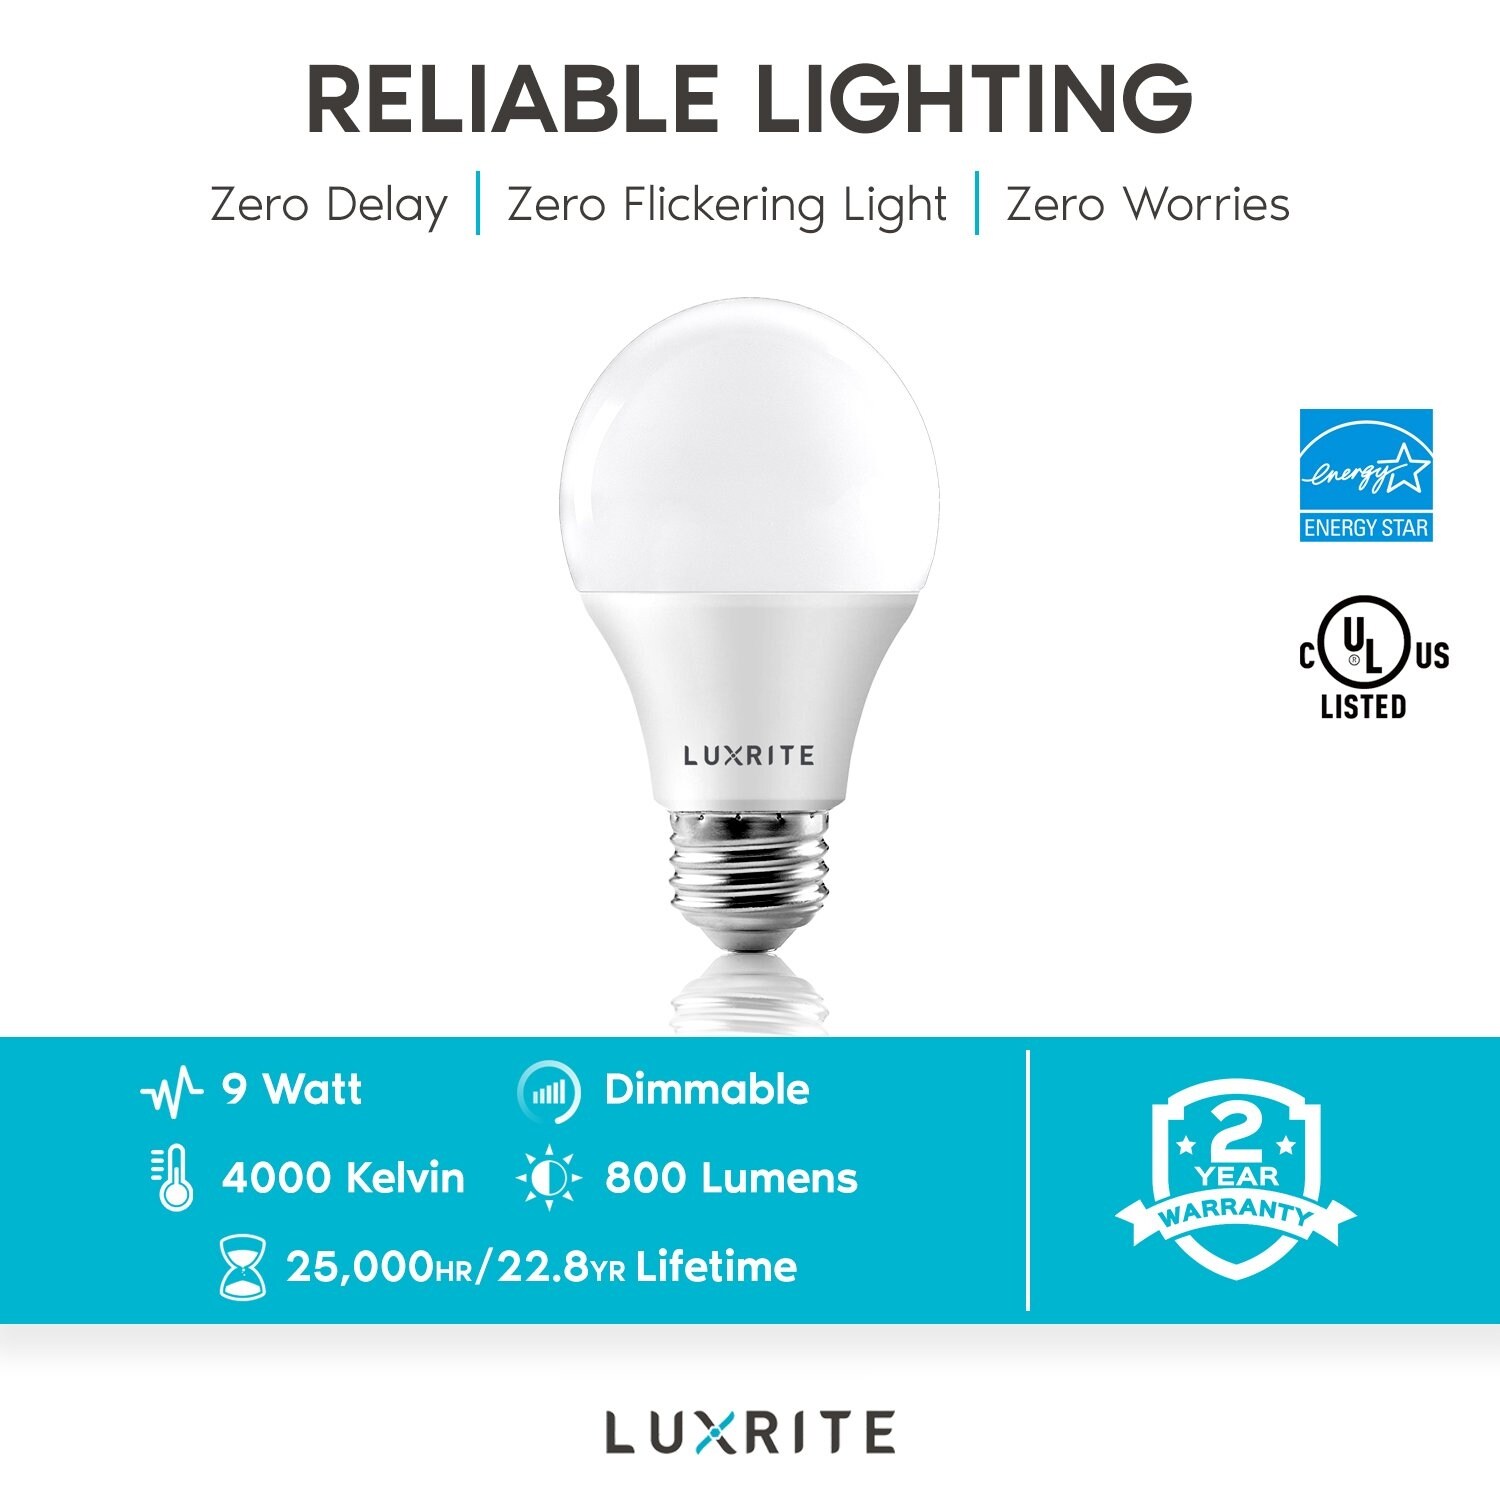 60W Laborate Lighting A19 LED Light Bulbs Commercial Lighting Energy Saving Outdoor & Indoor Home 800 Lumens 10-Year Life 8-Pack Dimmable Cool White 4000K Illumination 80+ CRI E26 Base 